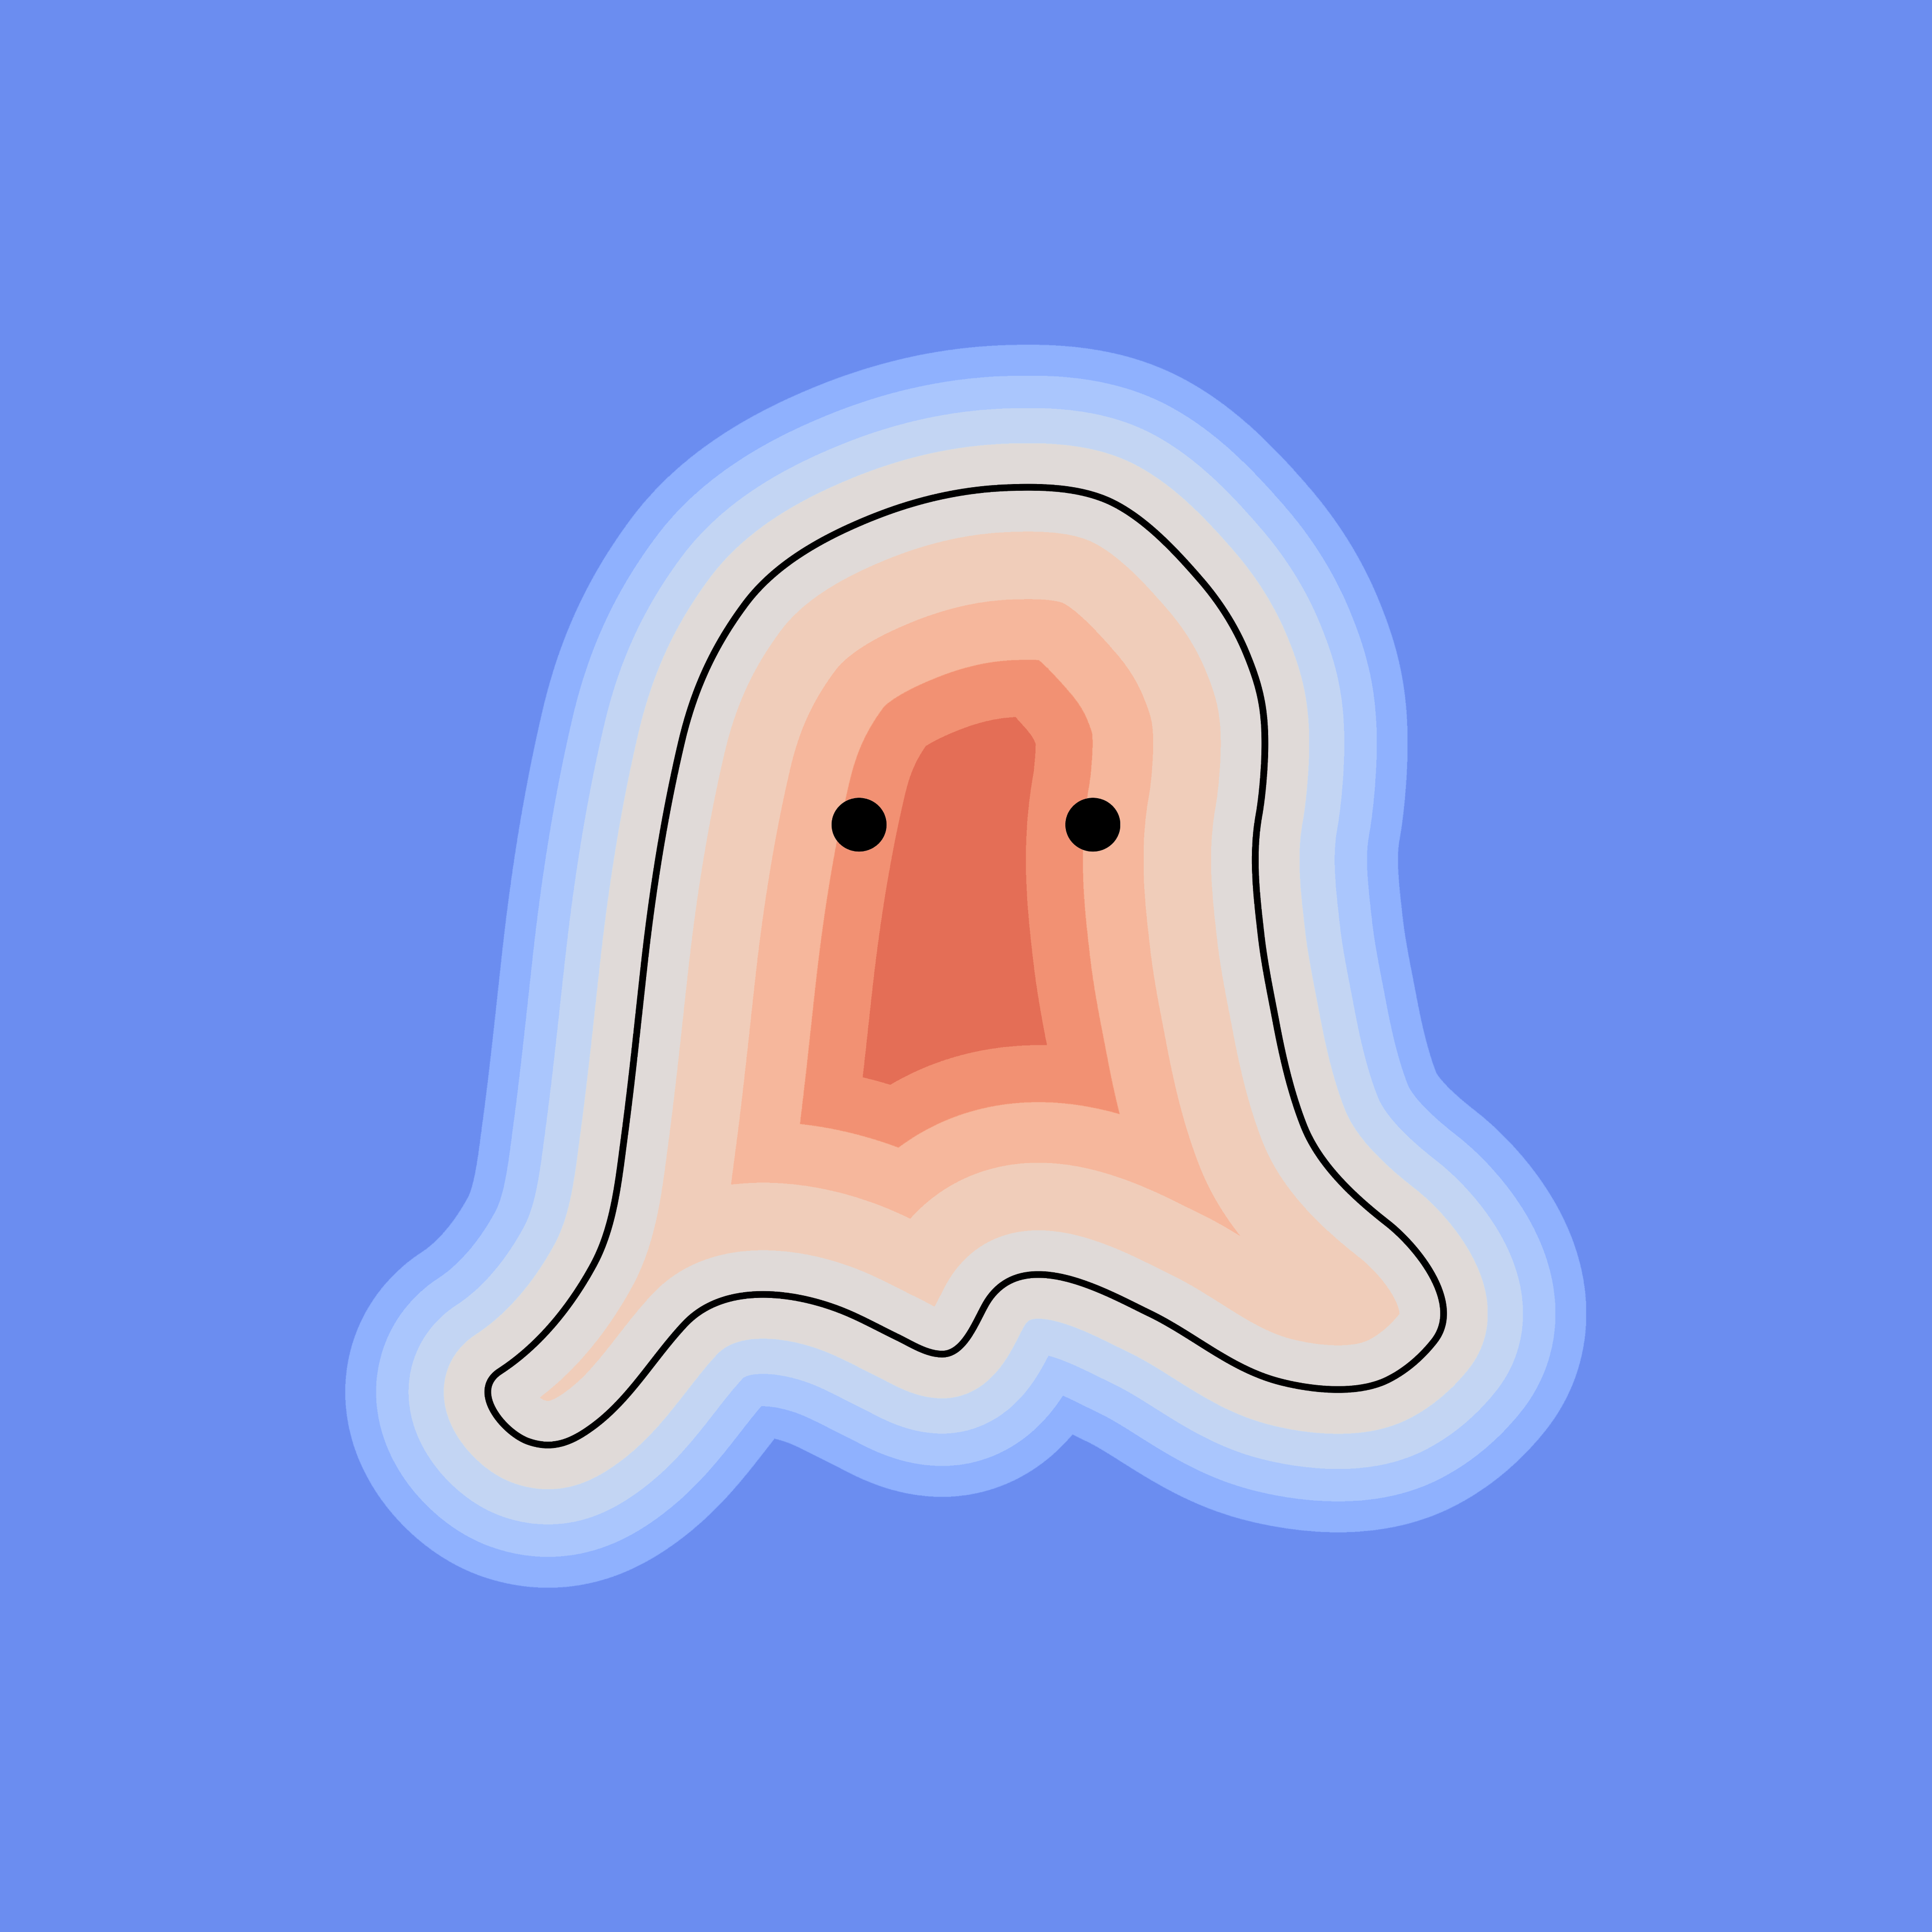 SDF of a little ghost shape